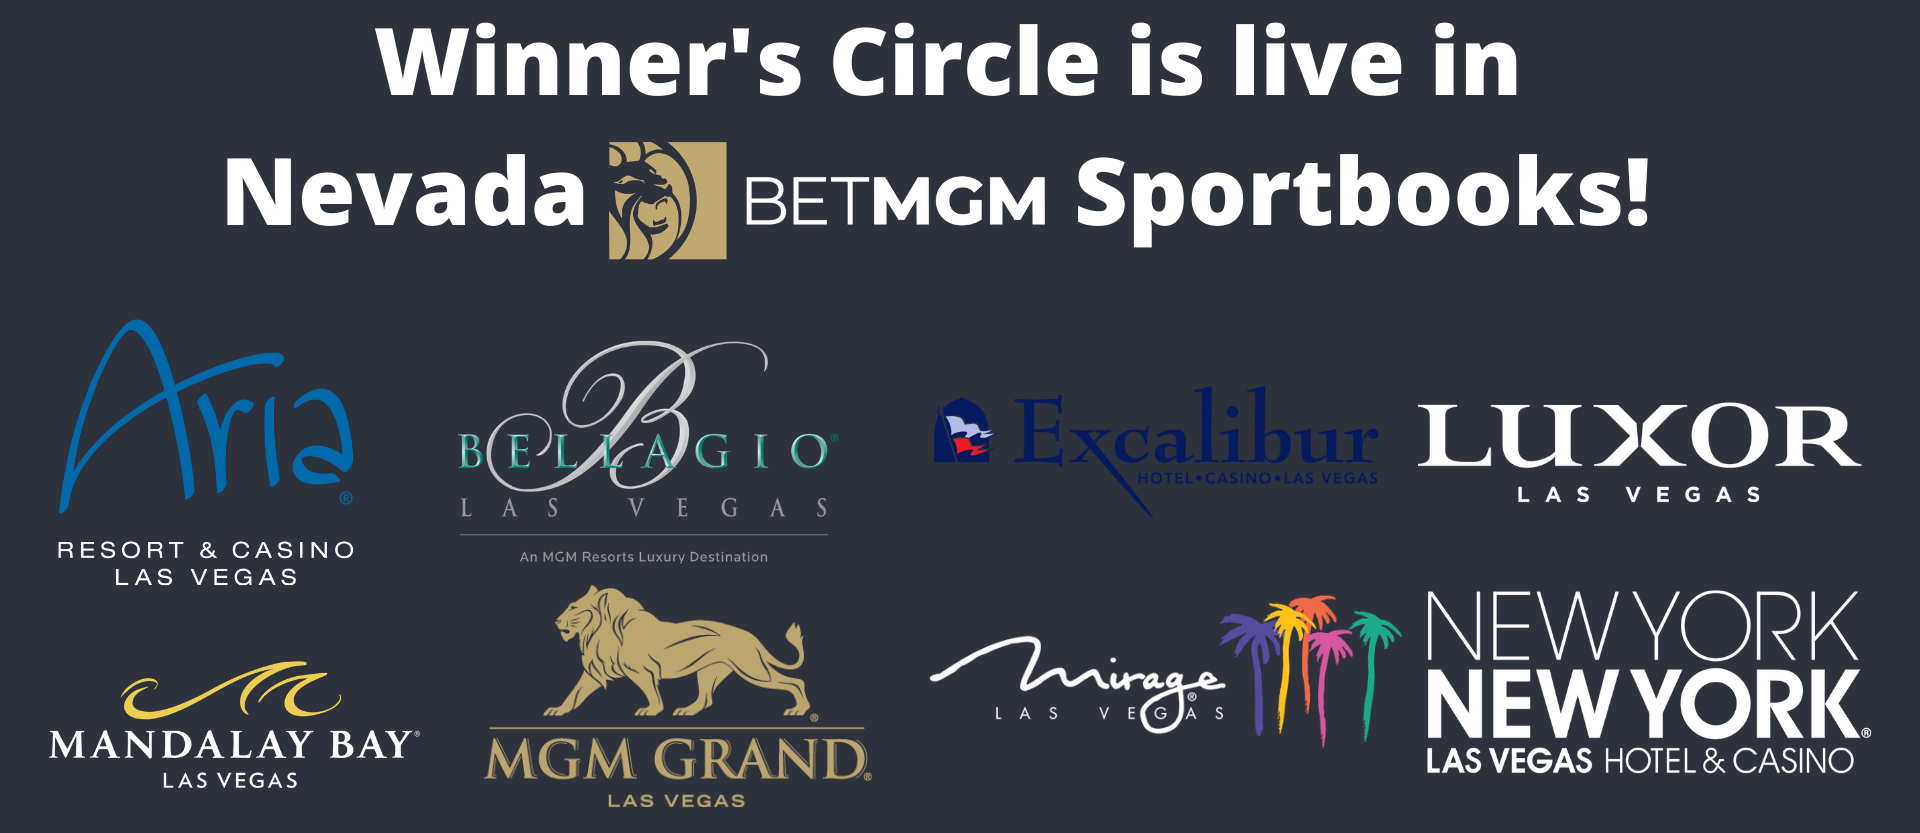 Casino Winner's Circle is live at